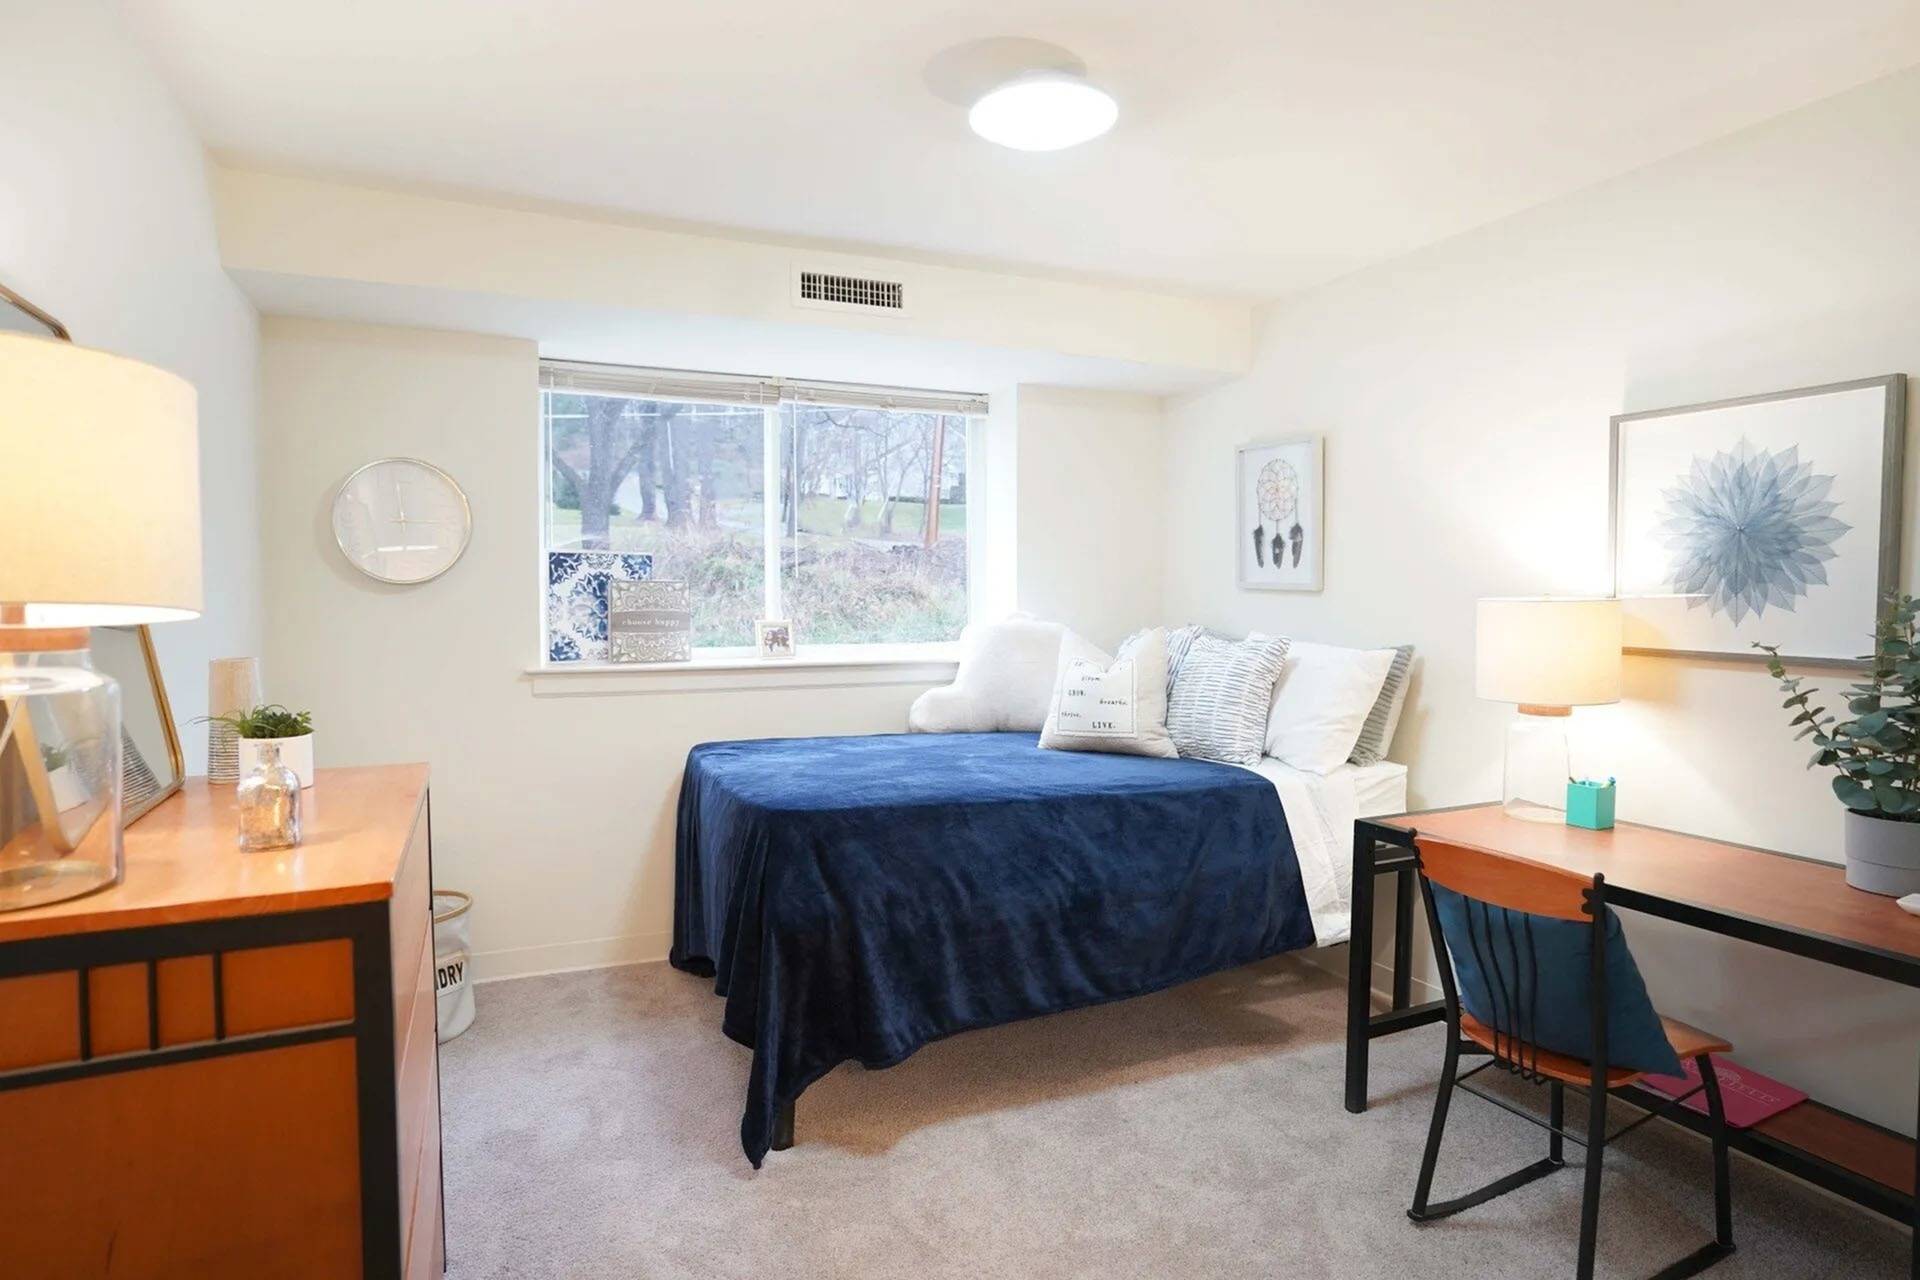 Apartments For Rent In Mansfield, PA - Commons At Mansfield - Spacious Bedroom With Plush Carpet Flooring, A Window, And Bedroom Furniture.